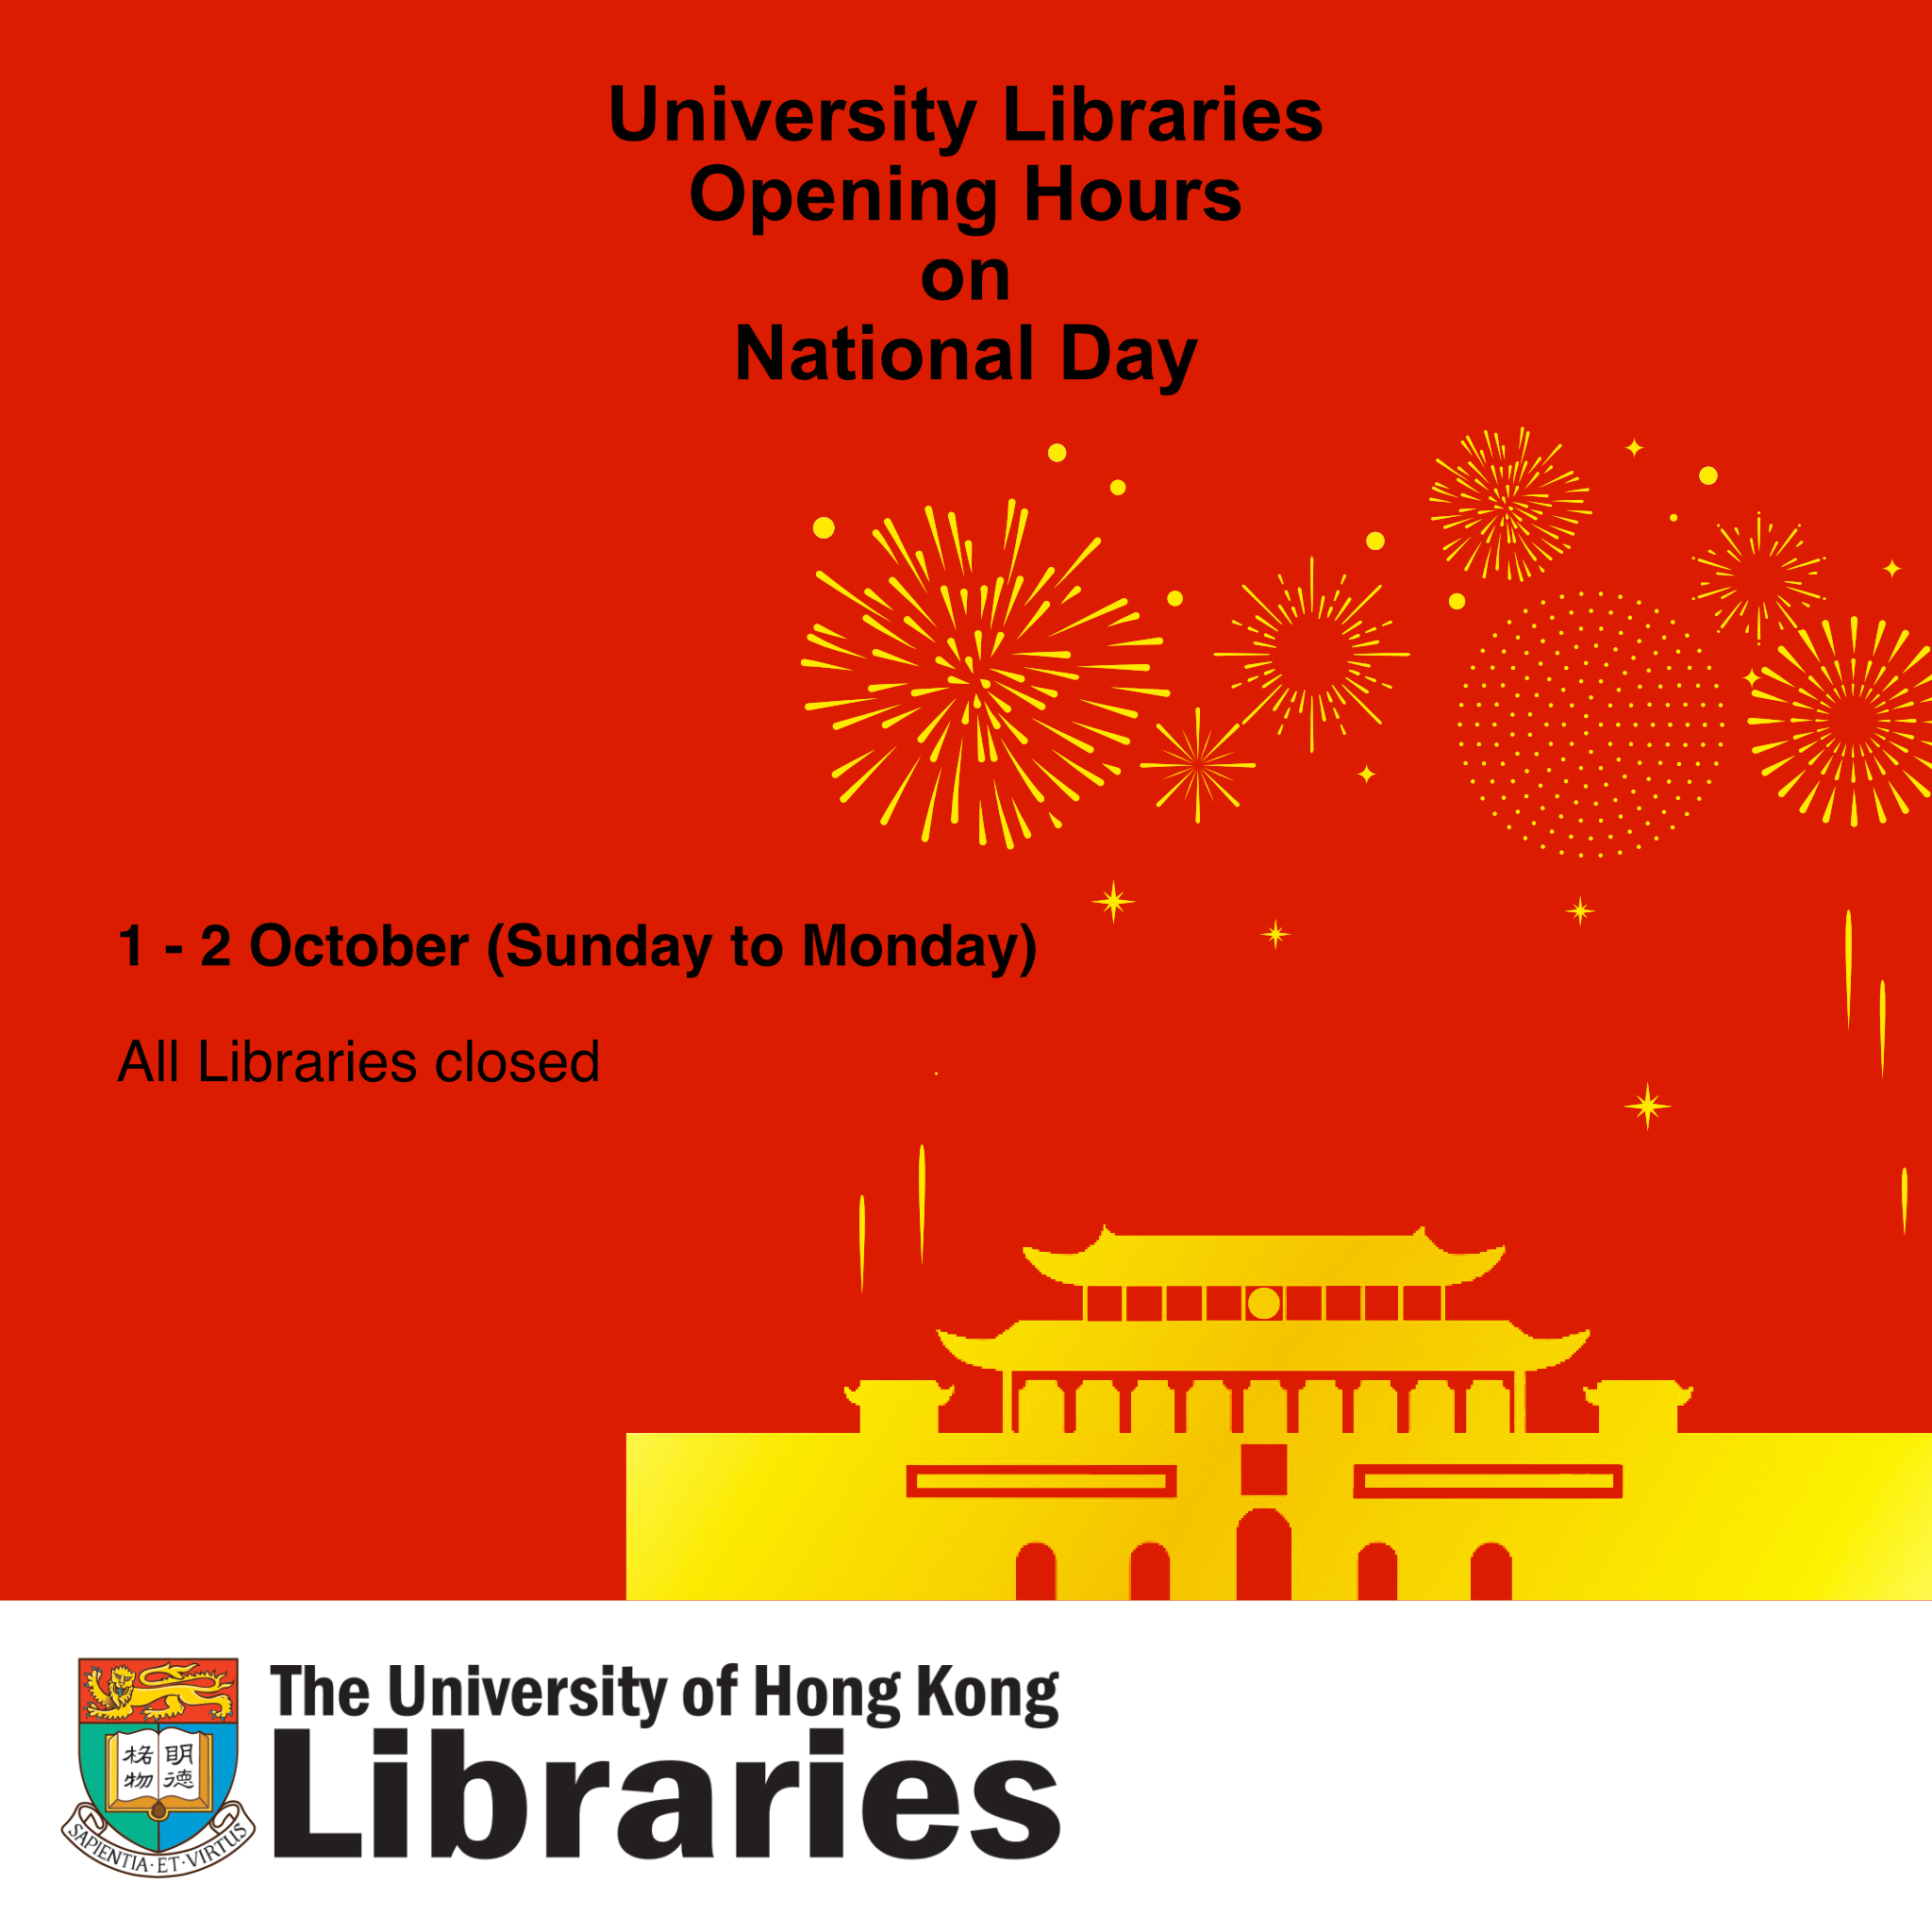 University Libraries Opening Hours on National Day